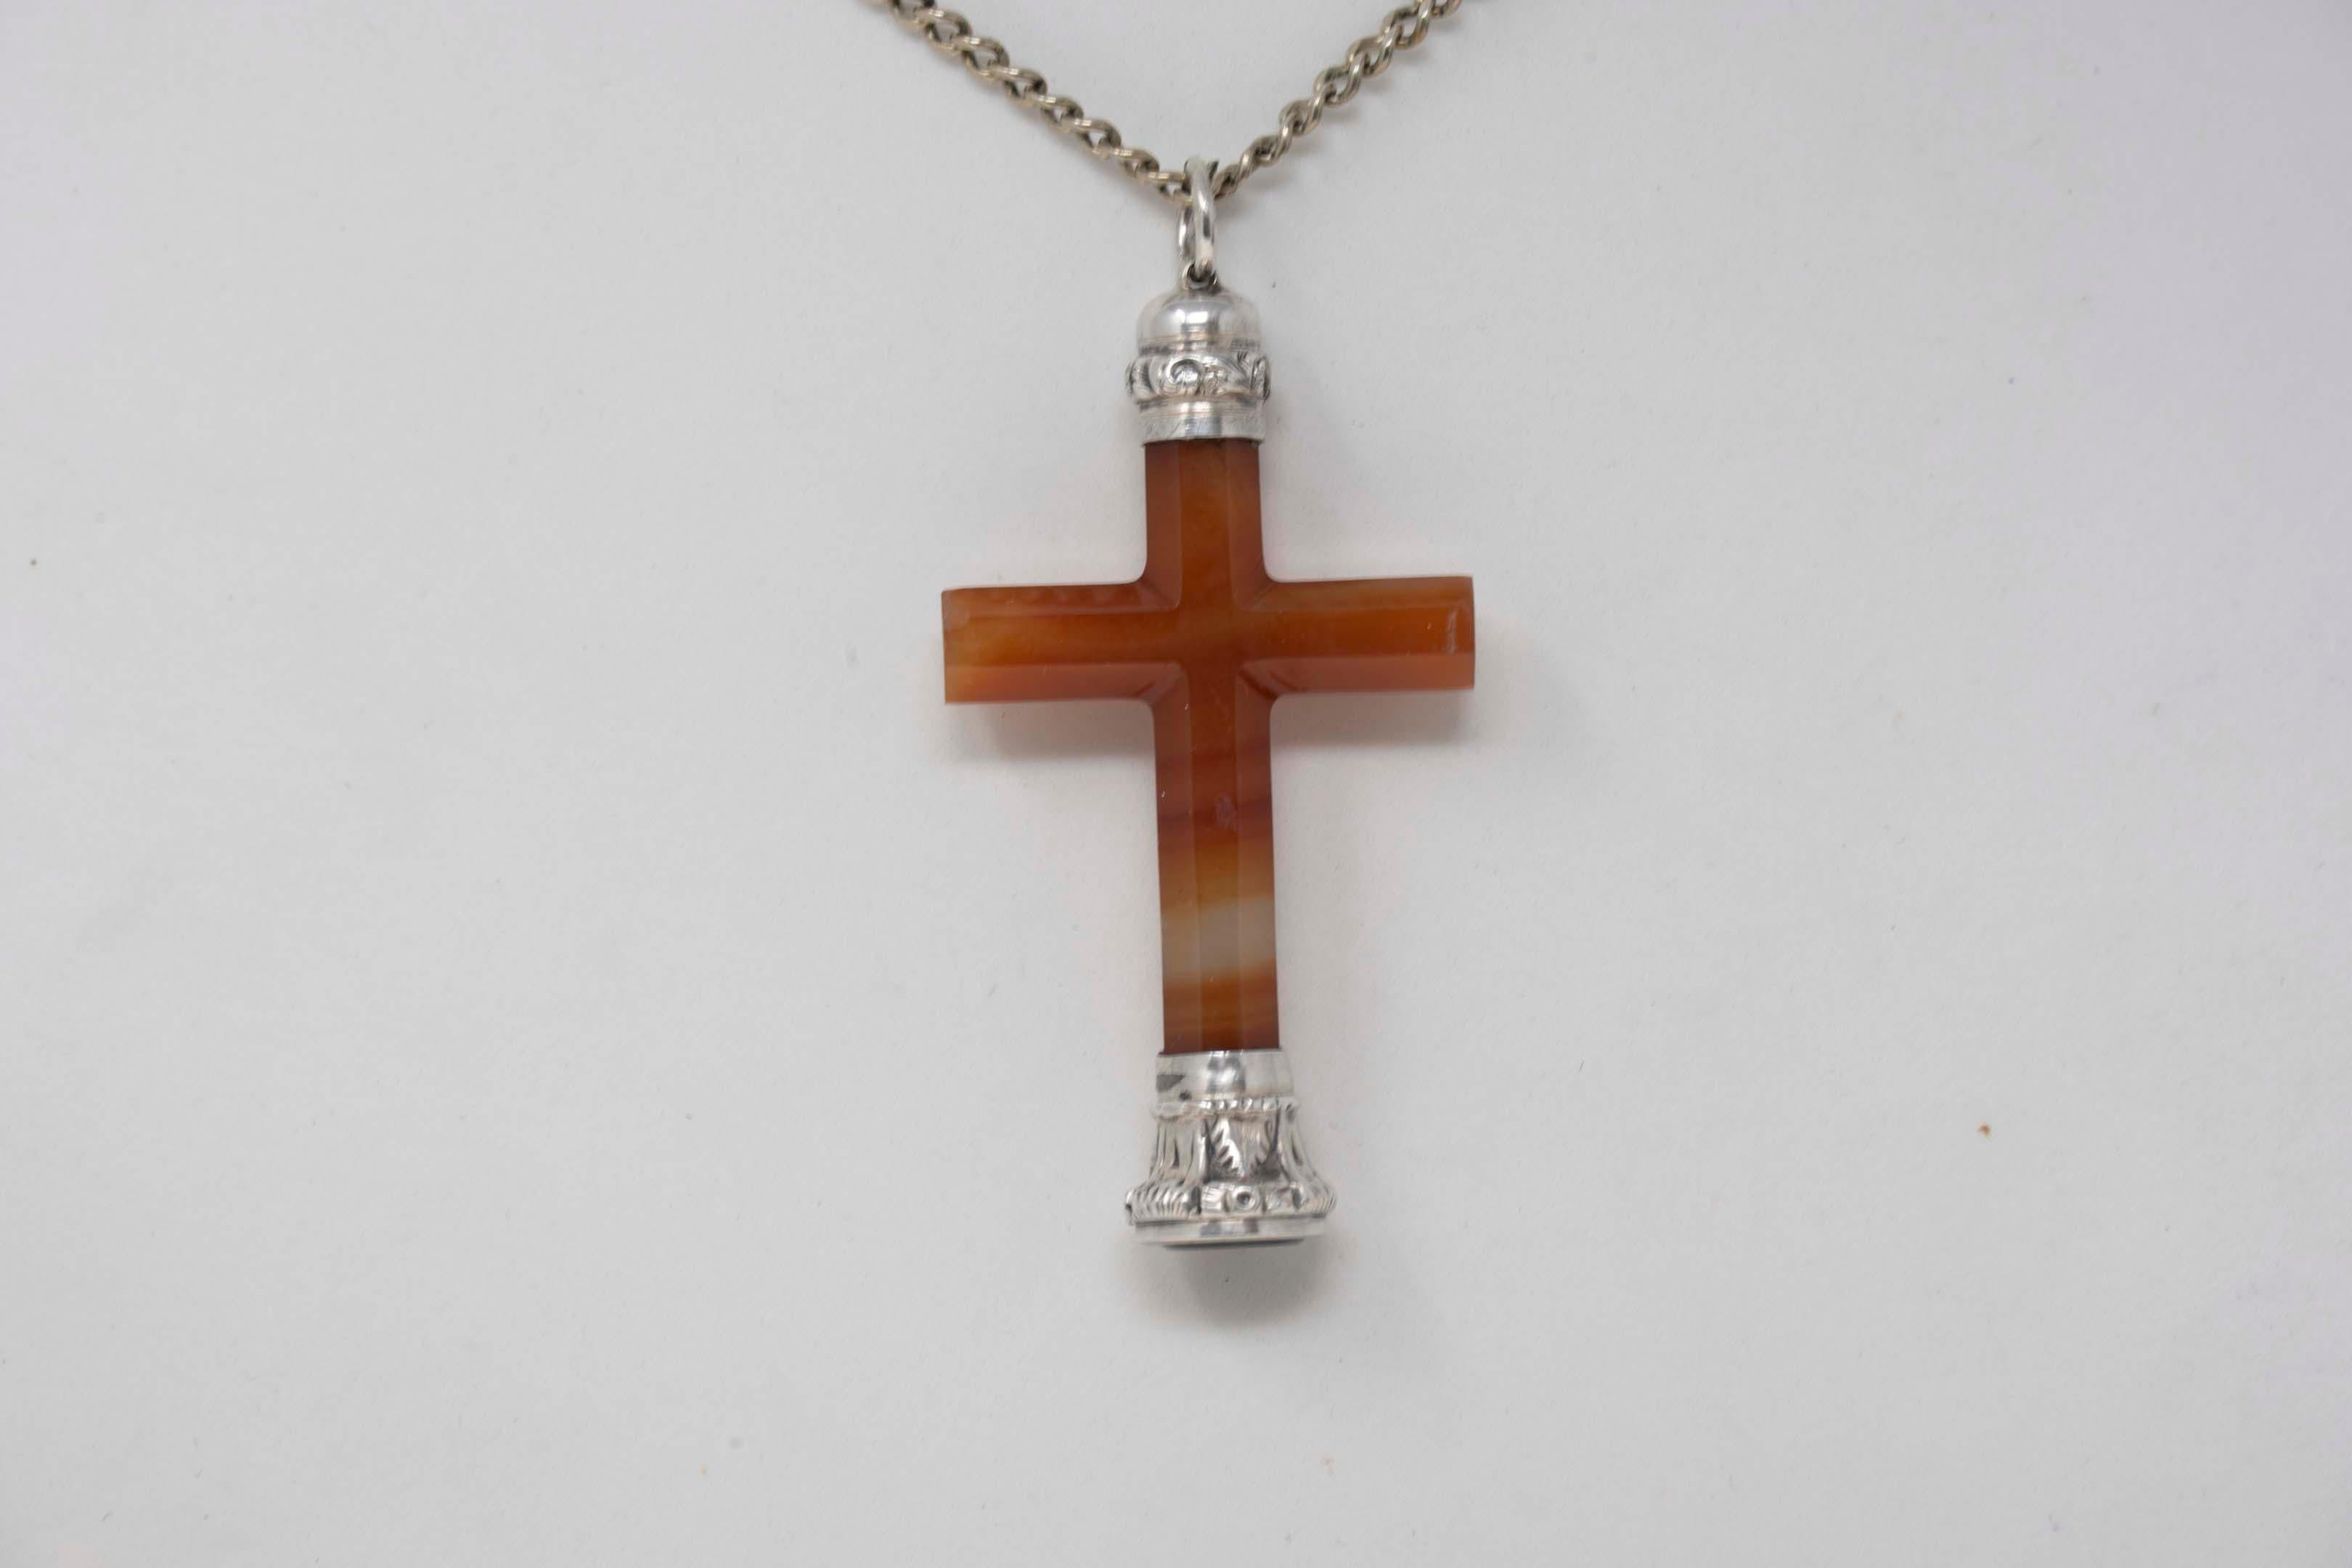 Victorian silver agate cross and chain with flower intaglio. Chain measures 27 inches long, cross measures 2 inches long x 1 1.4 inches wide. In good condition, no maker mark, circa 19th century.
